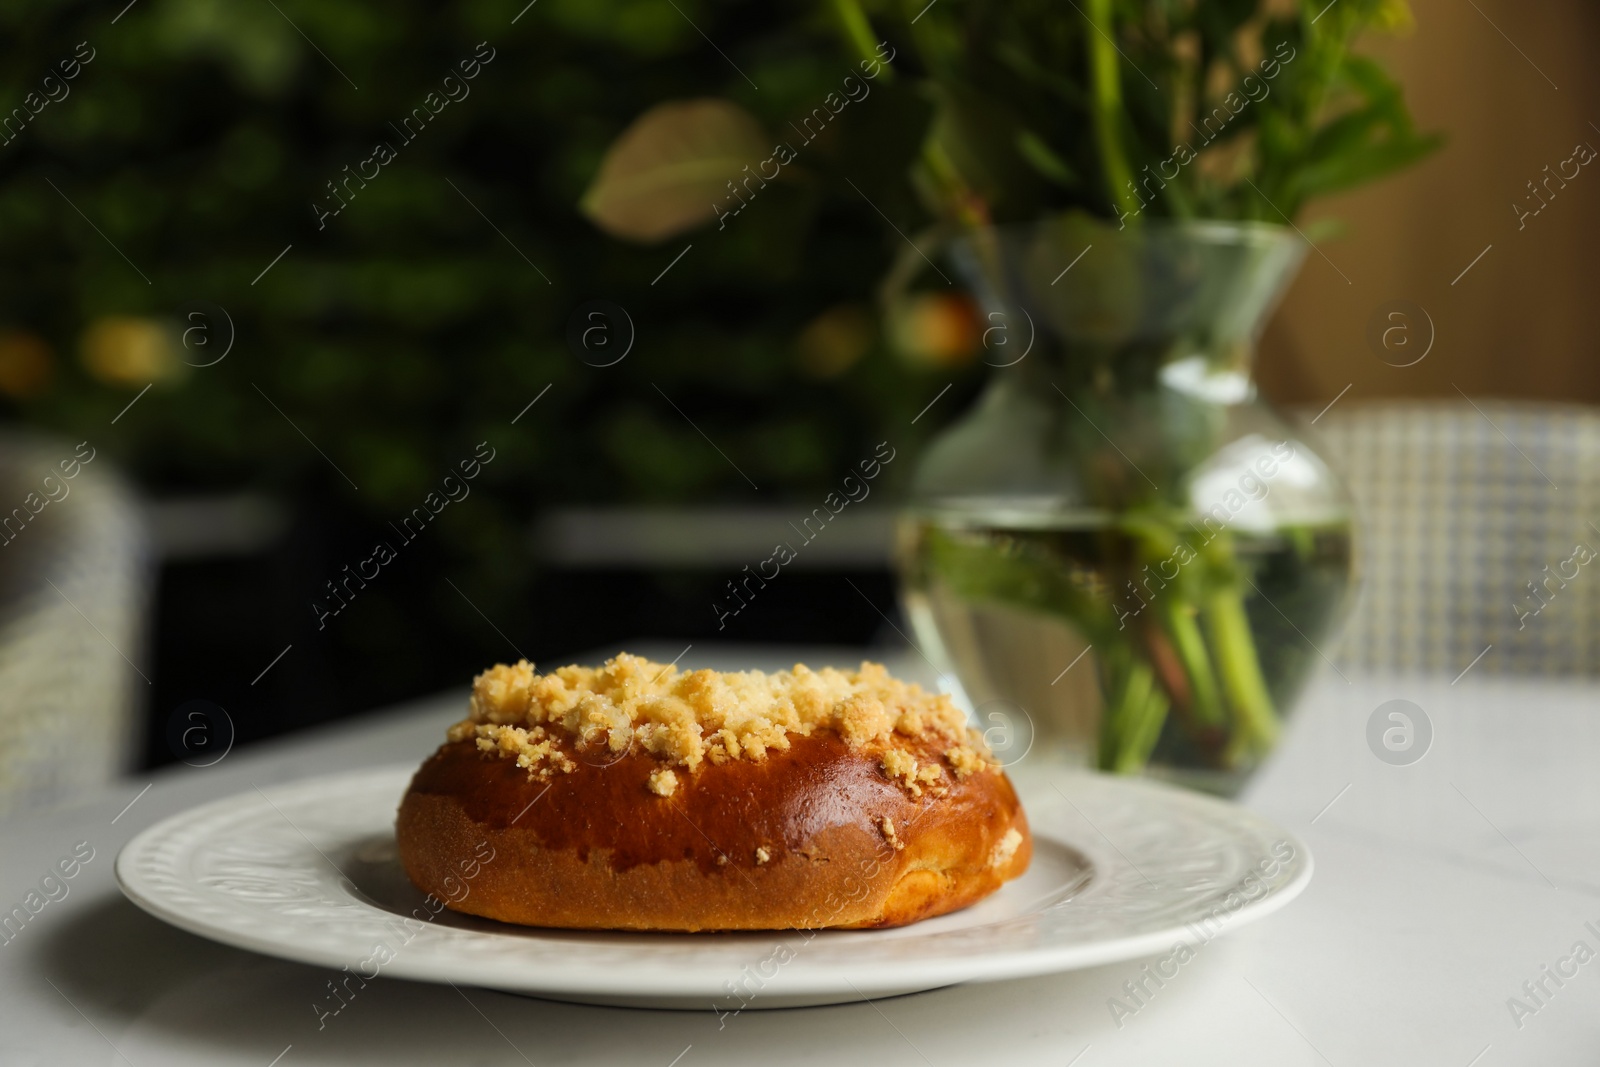 Photo of Tasty bun and vase with flowers on table in cafeteria